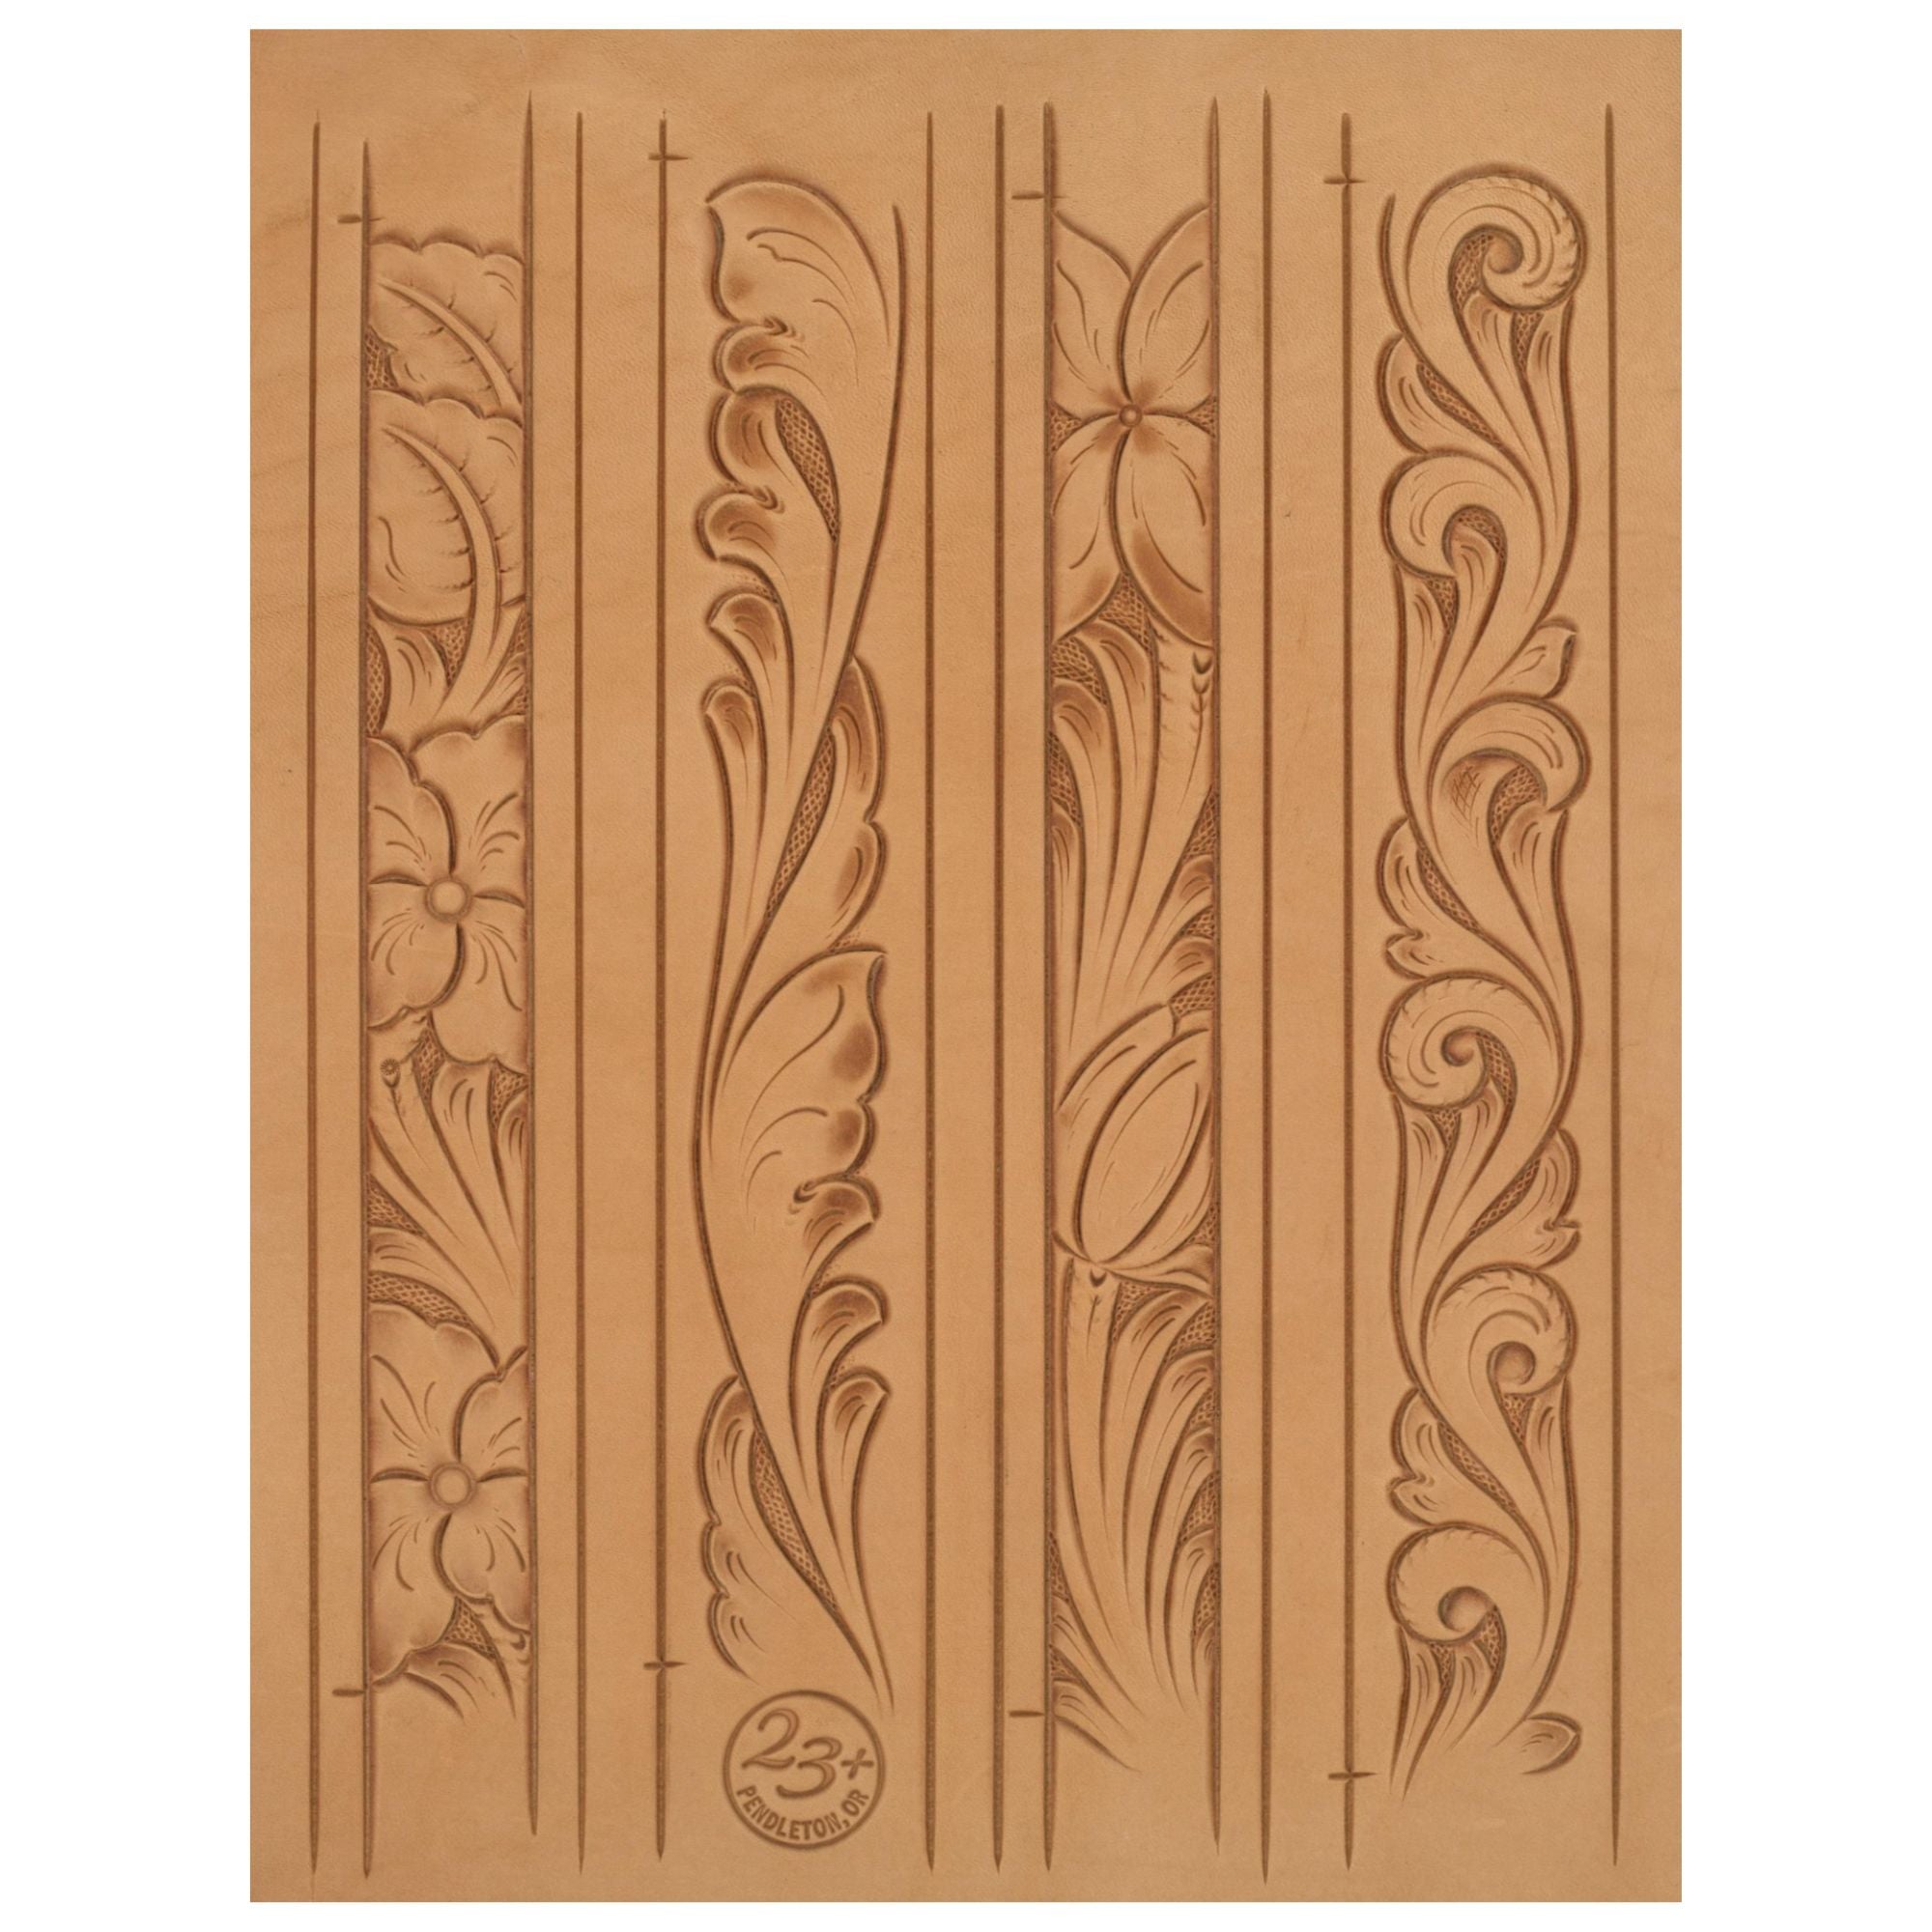 Leather Belt Pattern, Feathers, Vines and Scrolls, Tooling Design PDF  Download 